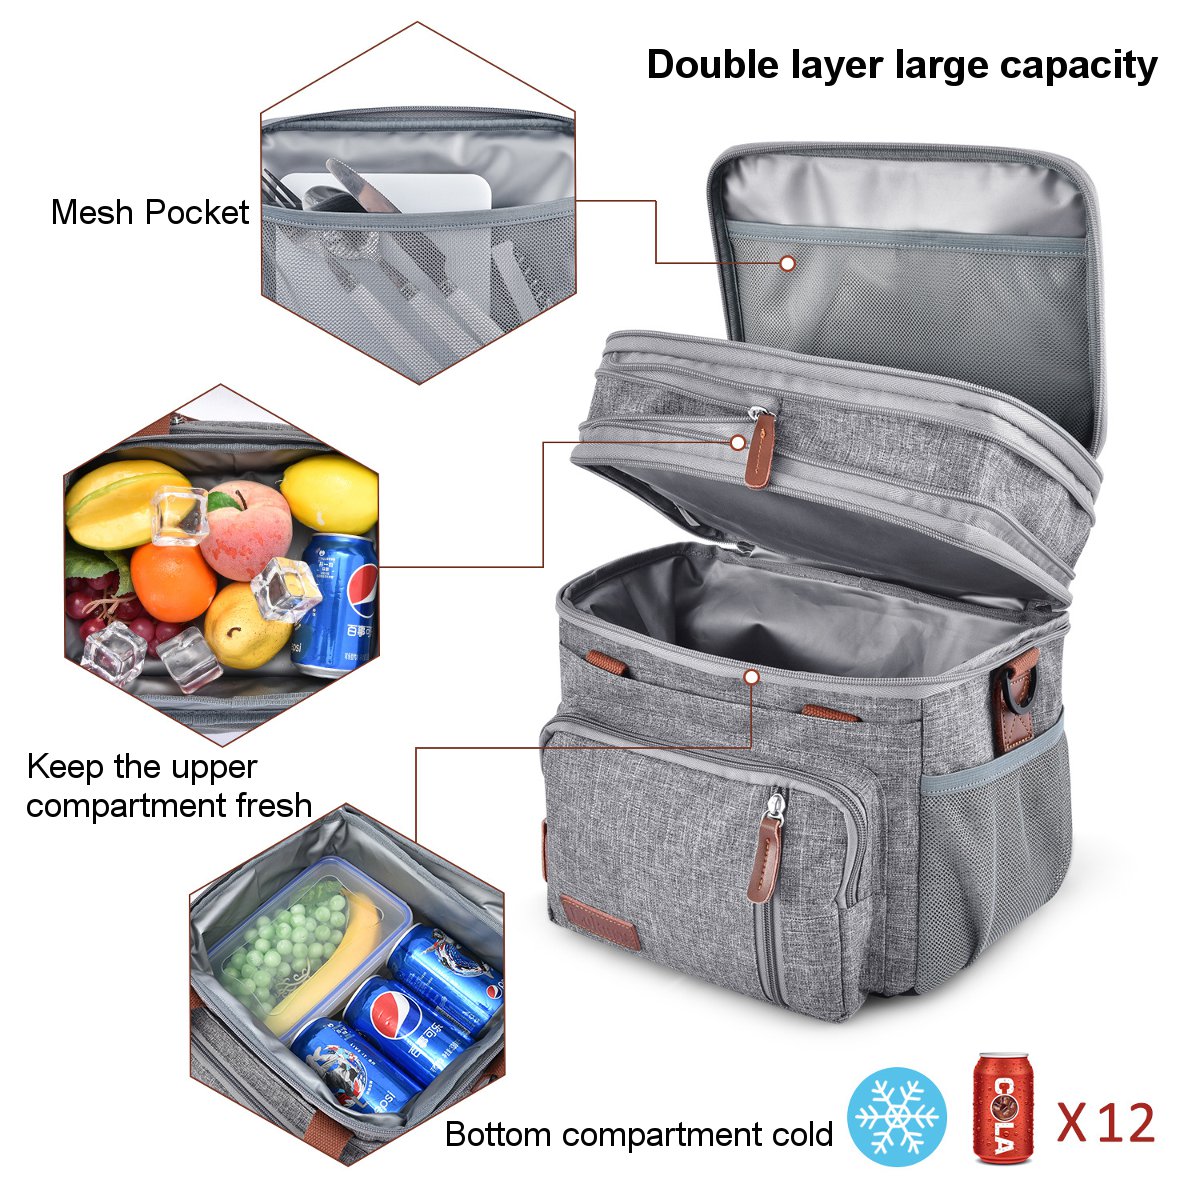 Expandable-Large-Capacity-with-Multiple-Pockets-Leak-proof-Drinks-Lunch-Insulated-Bag-Picnic-Storage-1863622-6